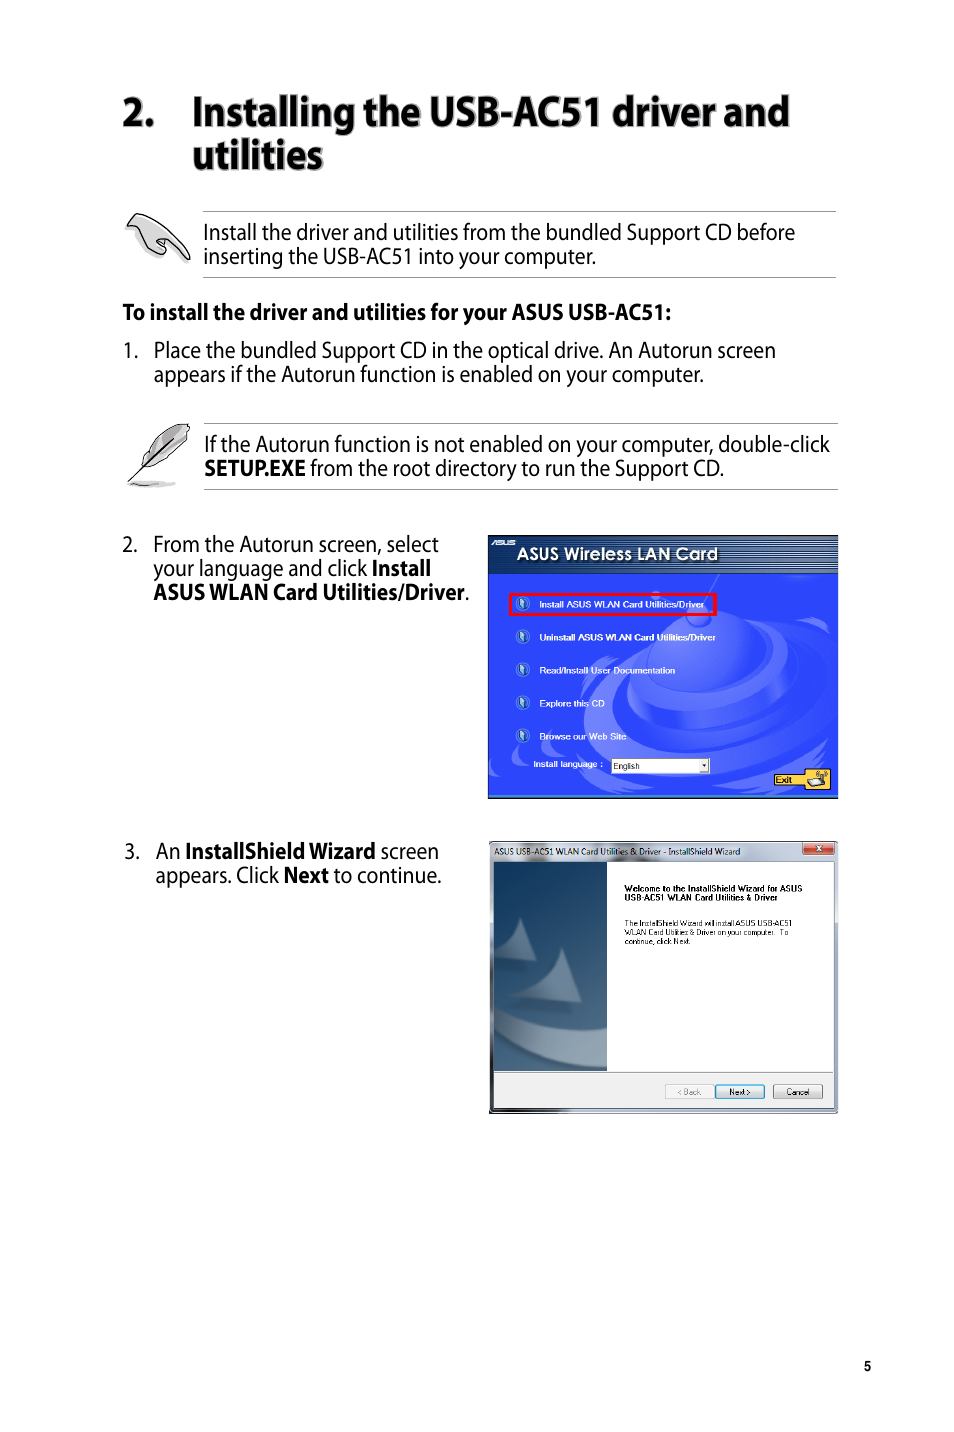 Installing the usb-ac51 driver and utilities | Asus USB-AC51 User Manual |  Page 5 / 36